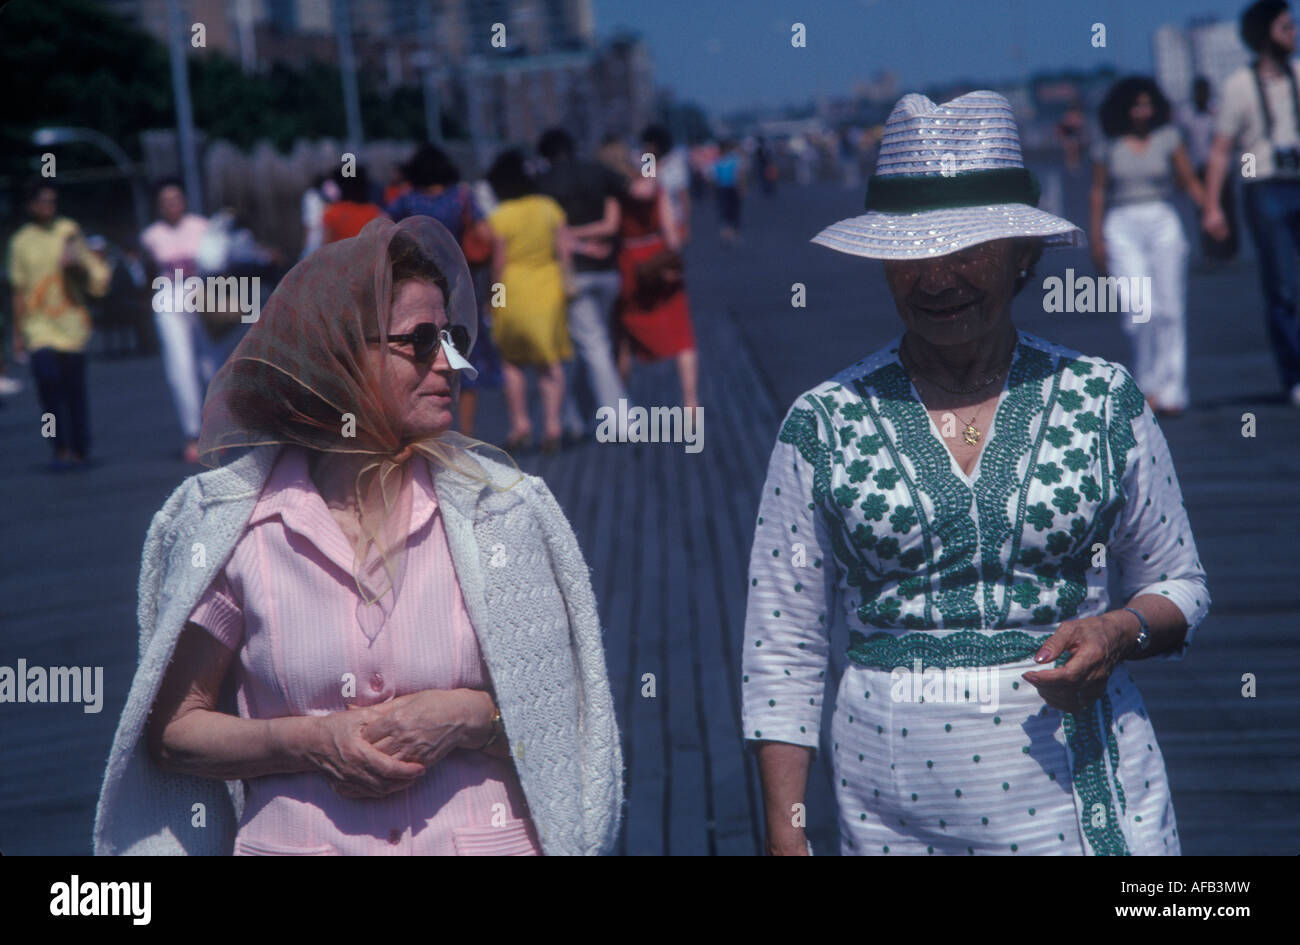 Retro Coney Island two women on vacation one wears a popular fashionable sun shield for her nose1980s 1981 Brooklyn, New York City US USA HOMER SYKES Stock Photo